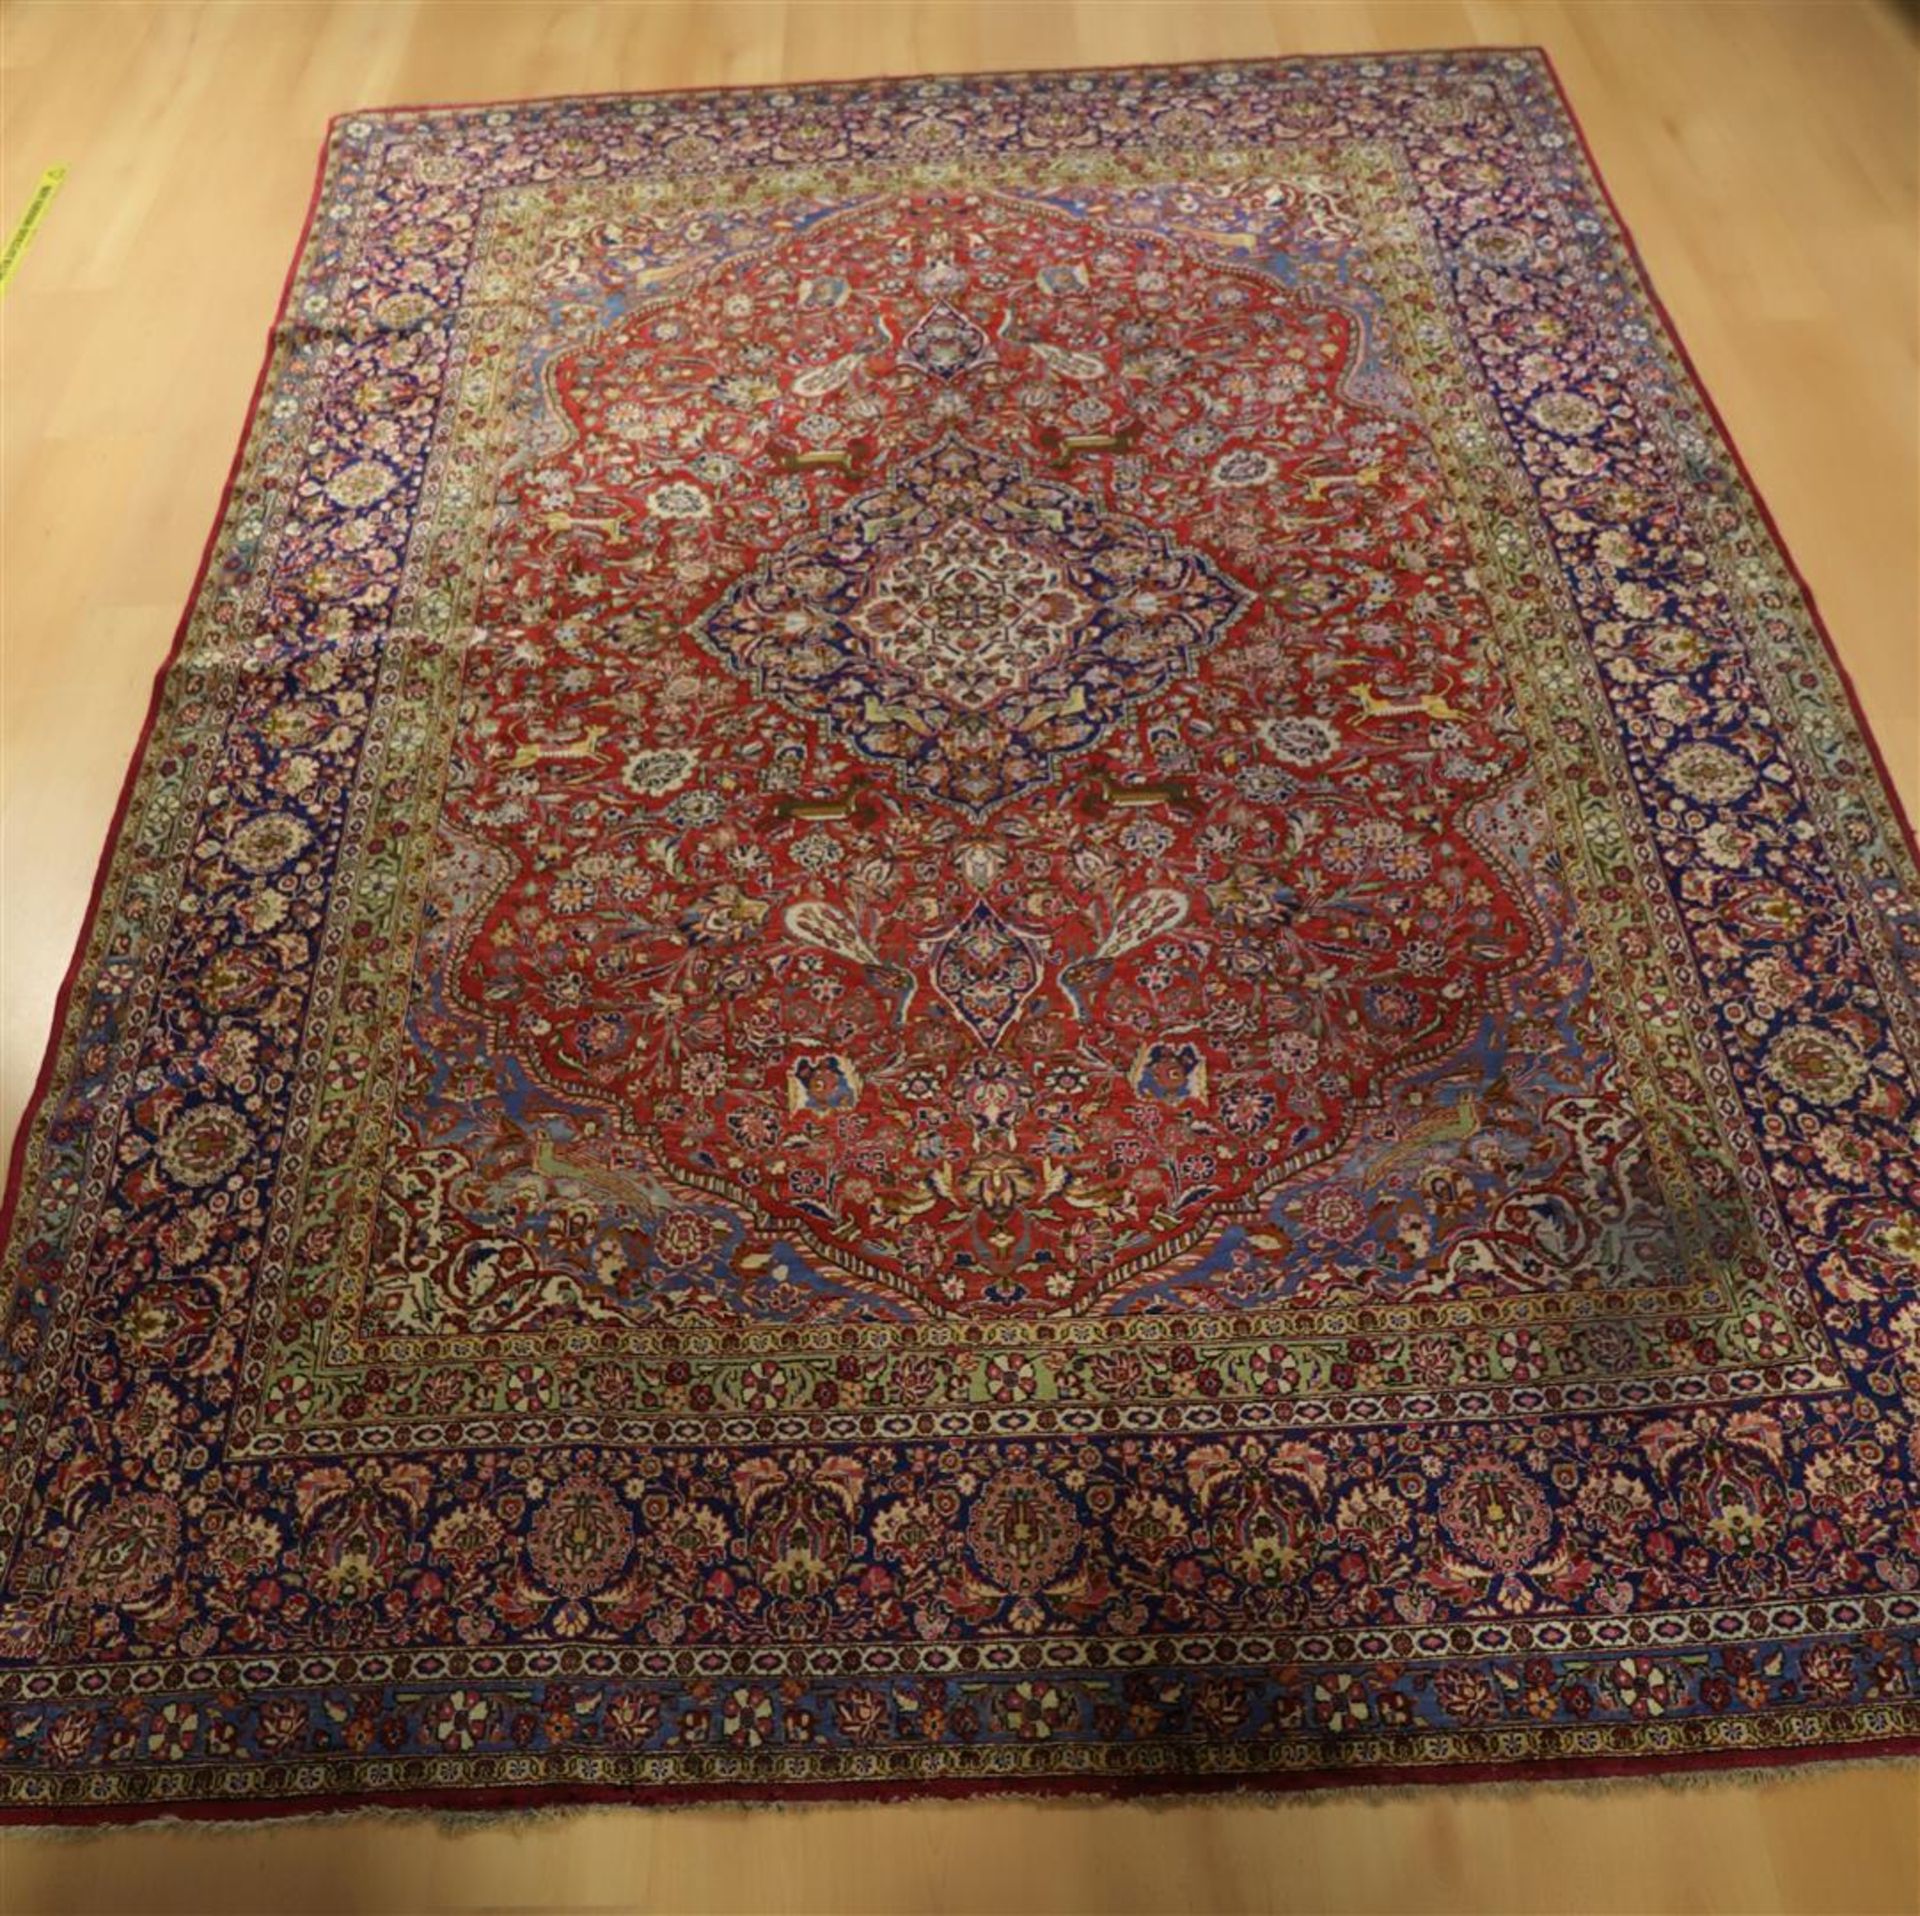 An Oriental silk carpet with red ground and floral motifs, Keshan, Iran, length 295 x w 229 cm (